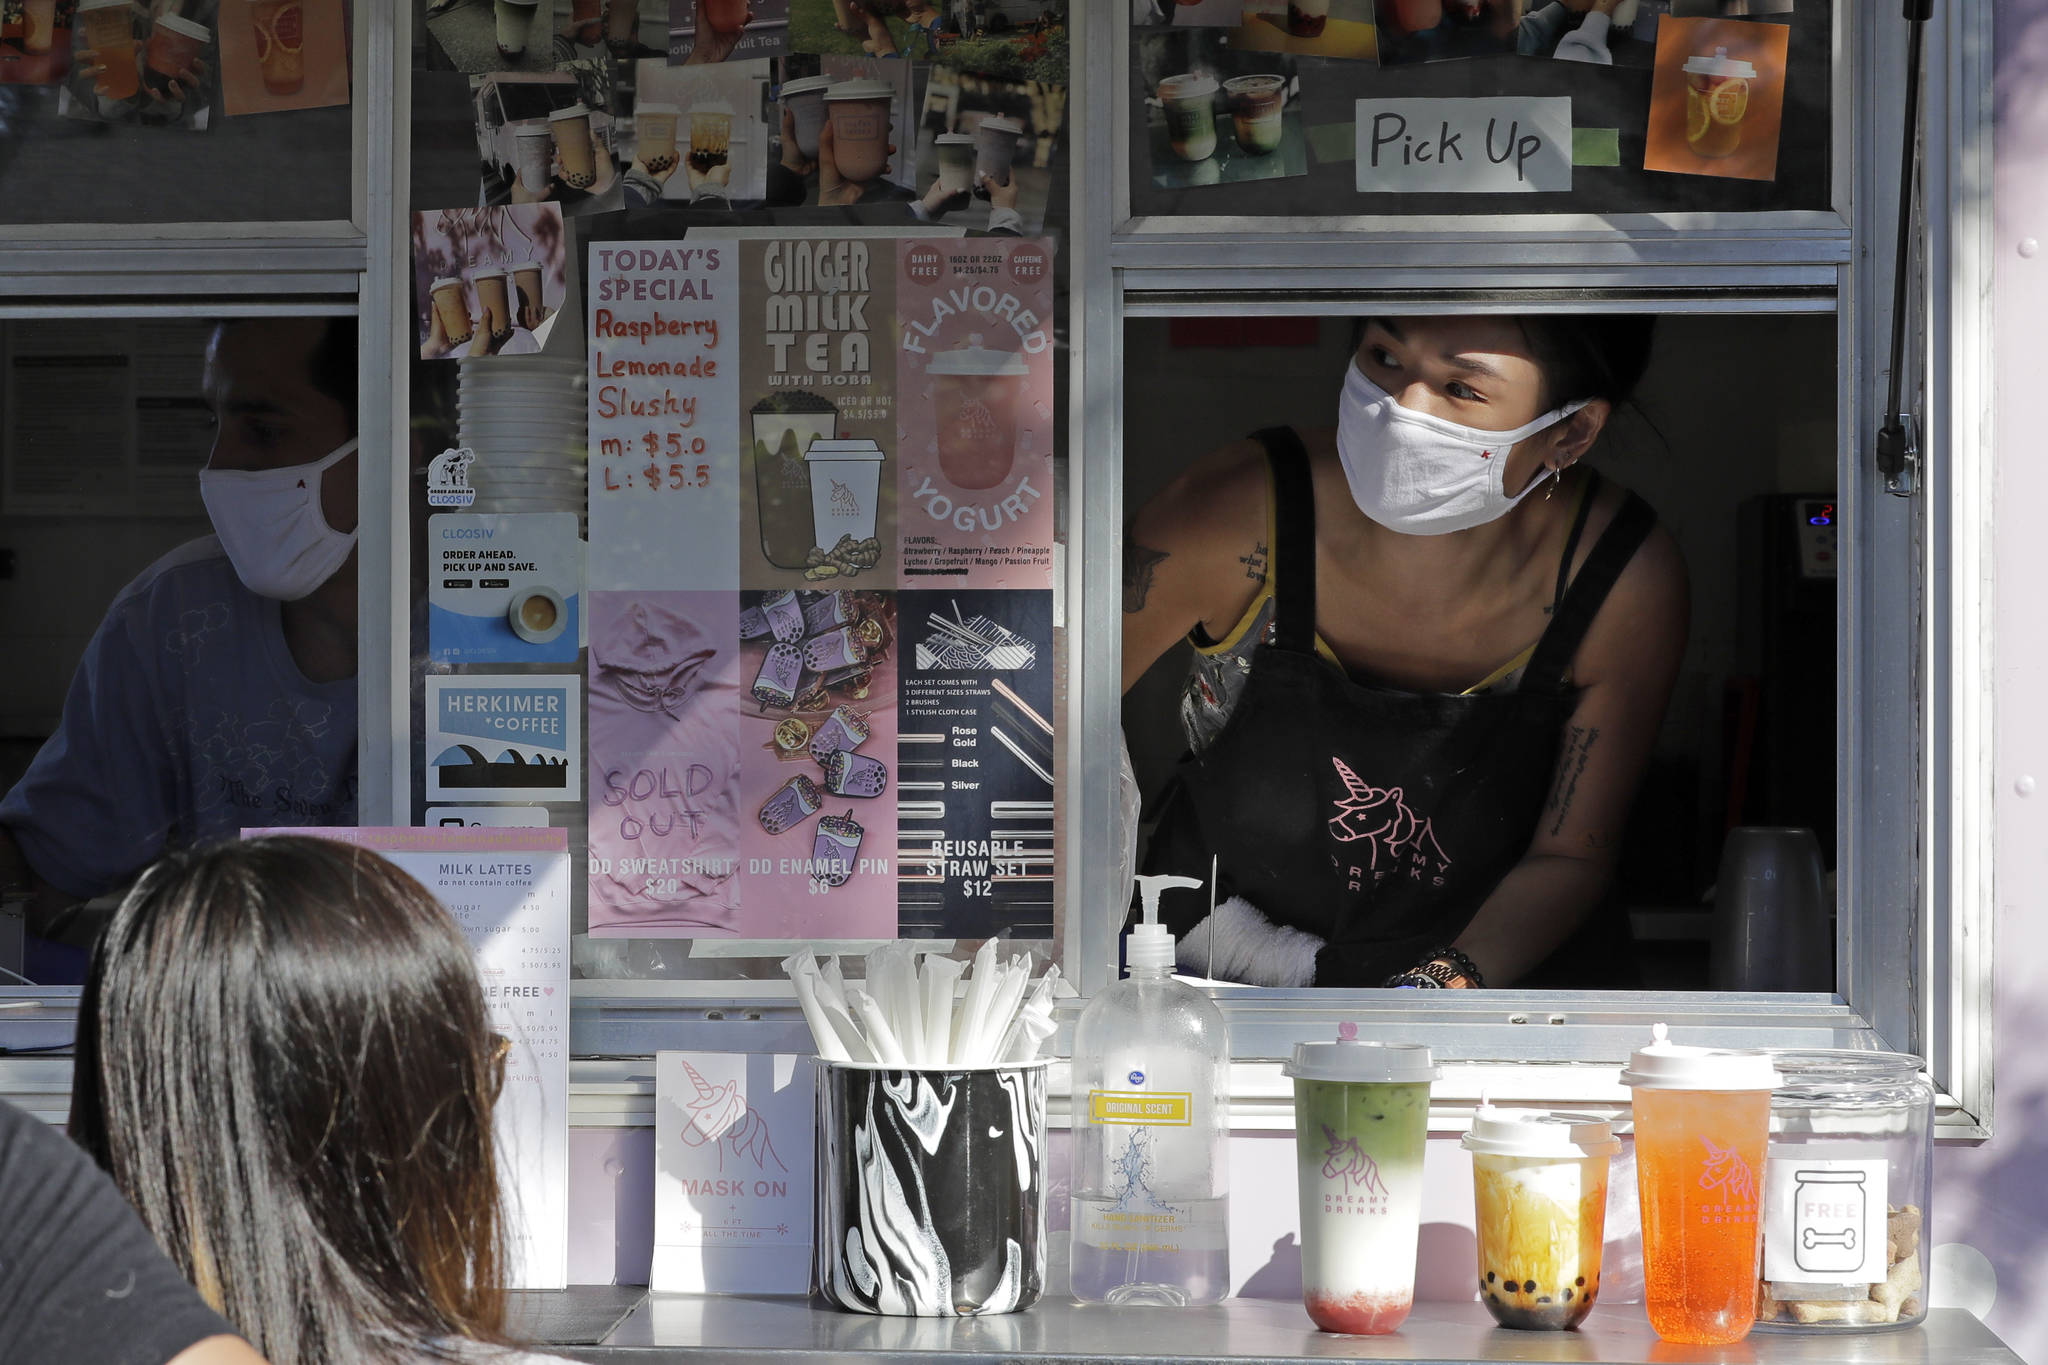 Kaye Fan, right, calls out orders as she works in her Dreamy Drinks food truck, Monday, Aug. 10, 2020, near the suburb of Lynnwood, Wash., north of Seattle. Long seen as a feature of city living, food trucks are now finding customers in the suburbs during the coronavirus pandemic as people are working and spending most of their time at home. (AP Photo / Ted S. Warren)